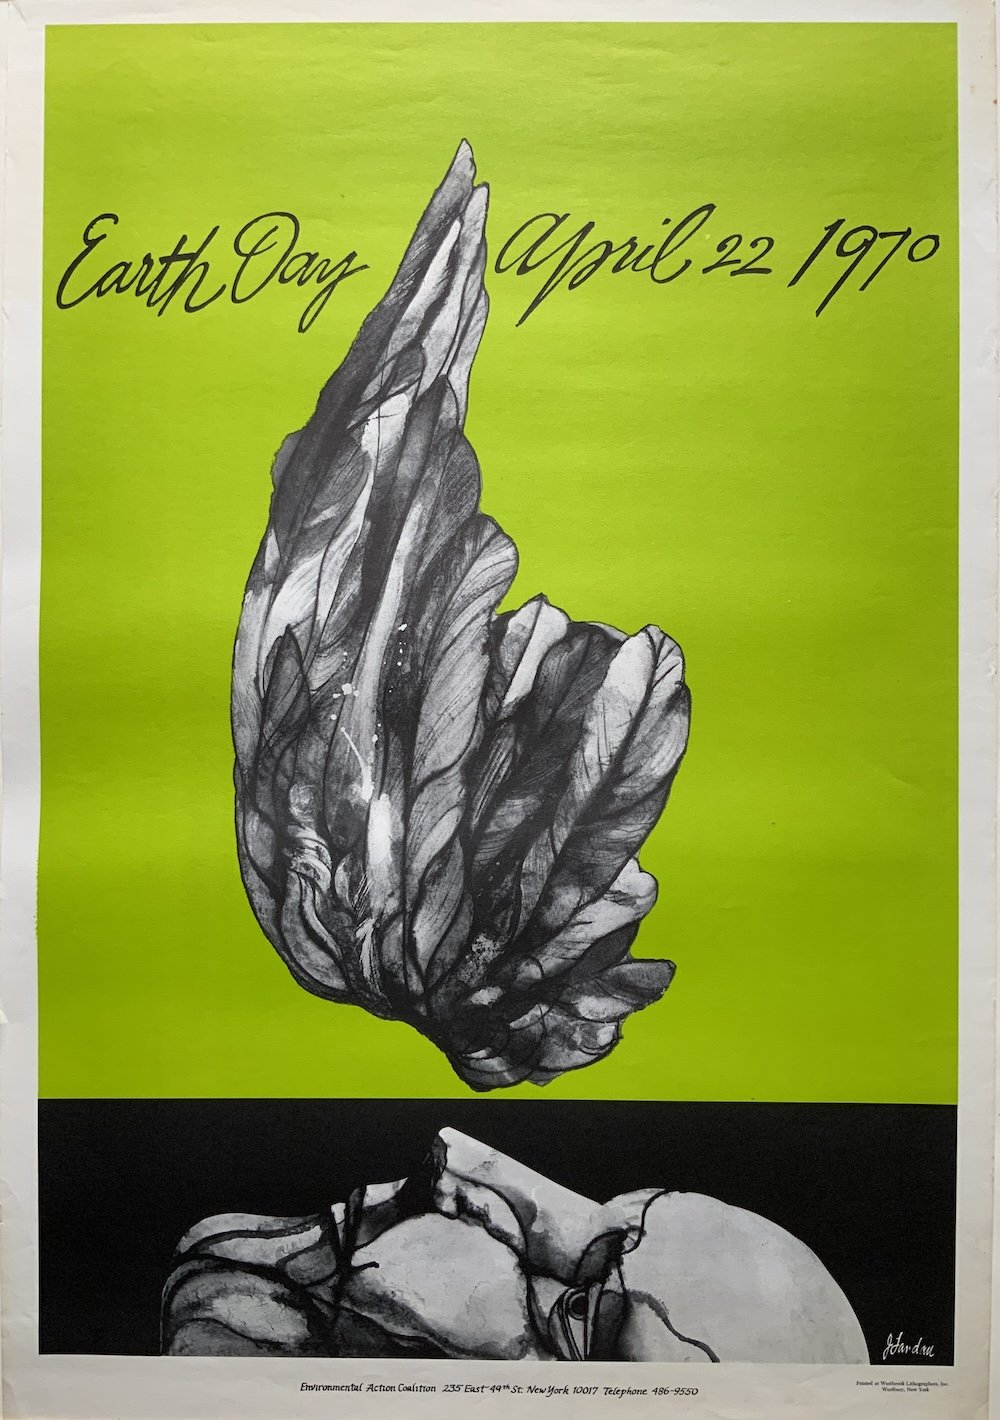  Poster by  Jack Landau  for the first Earth Day. 